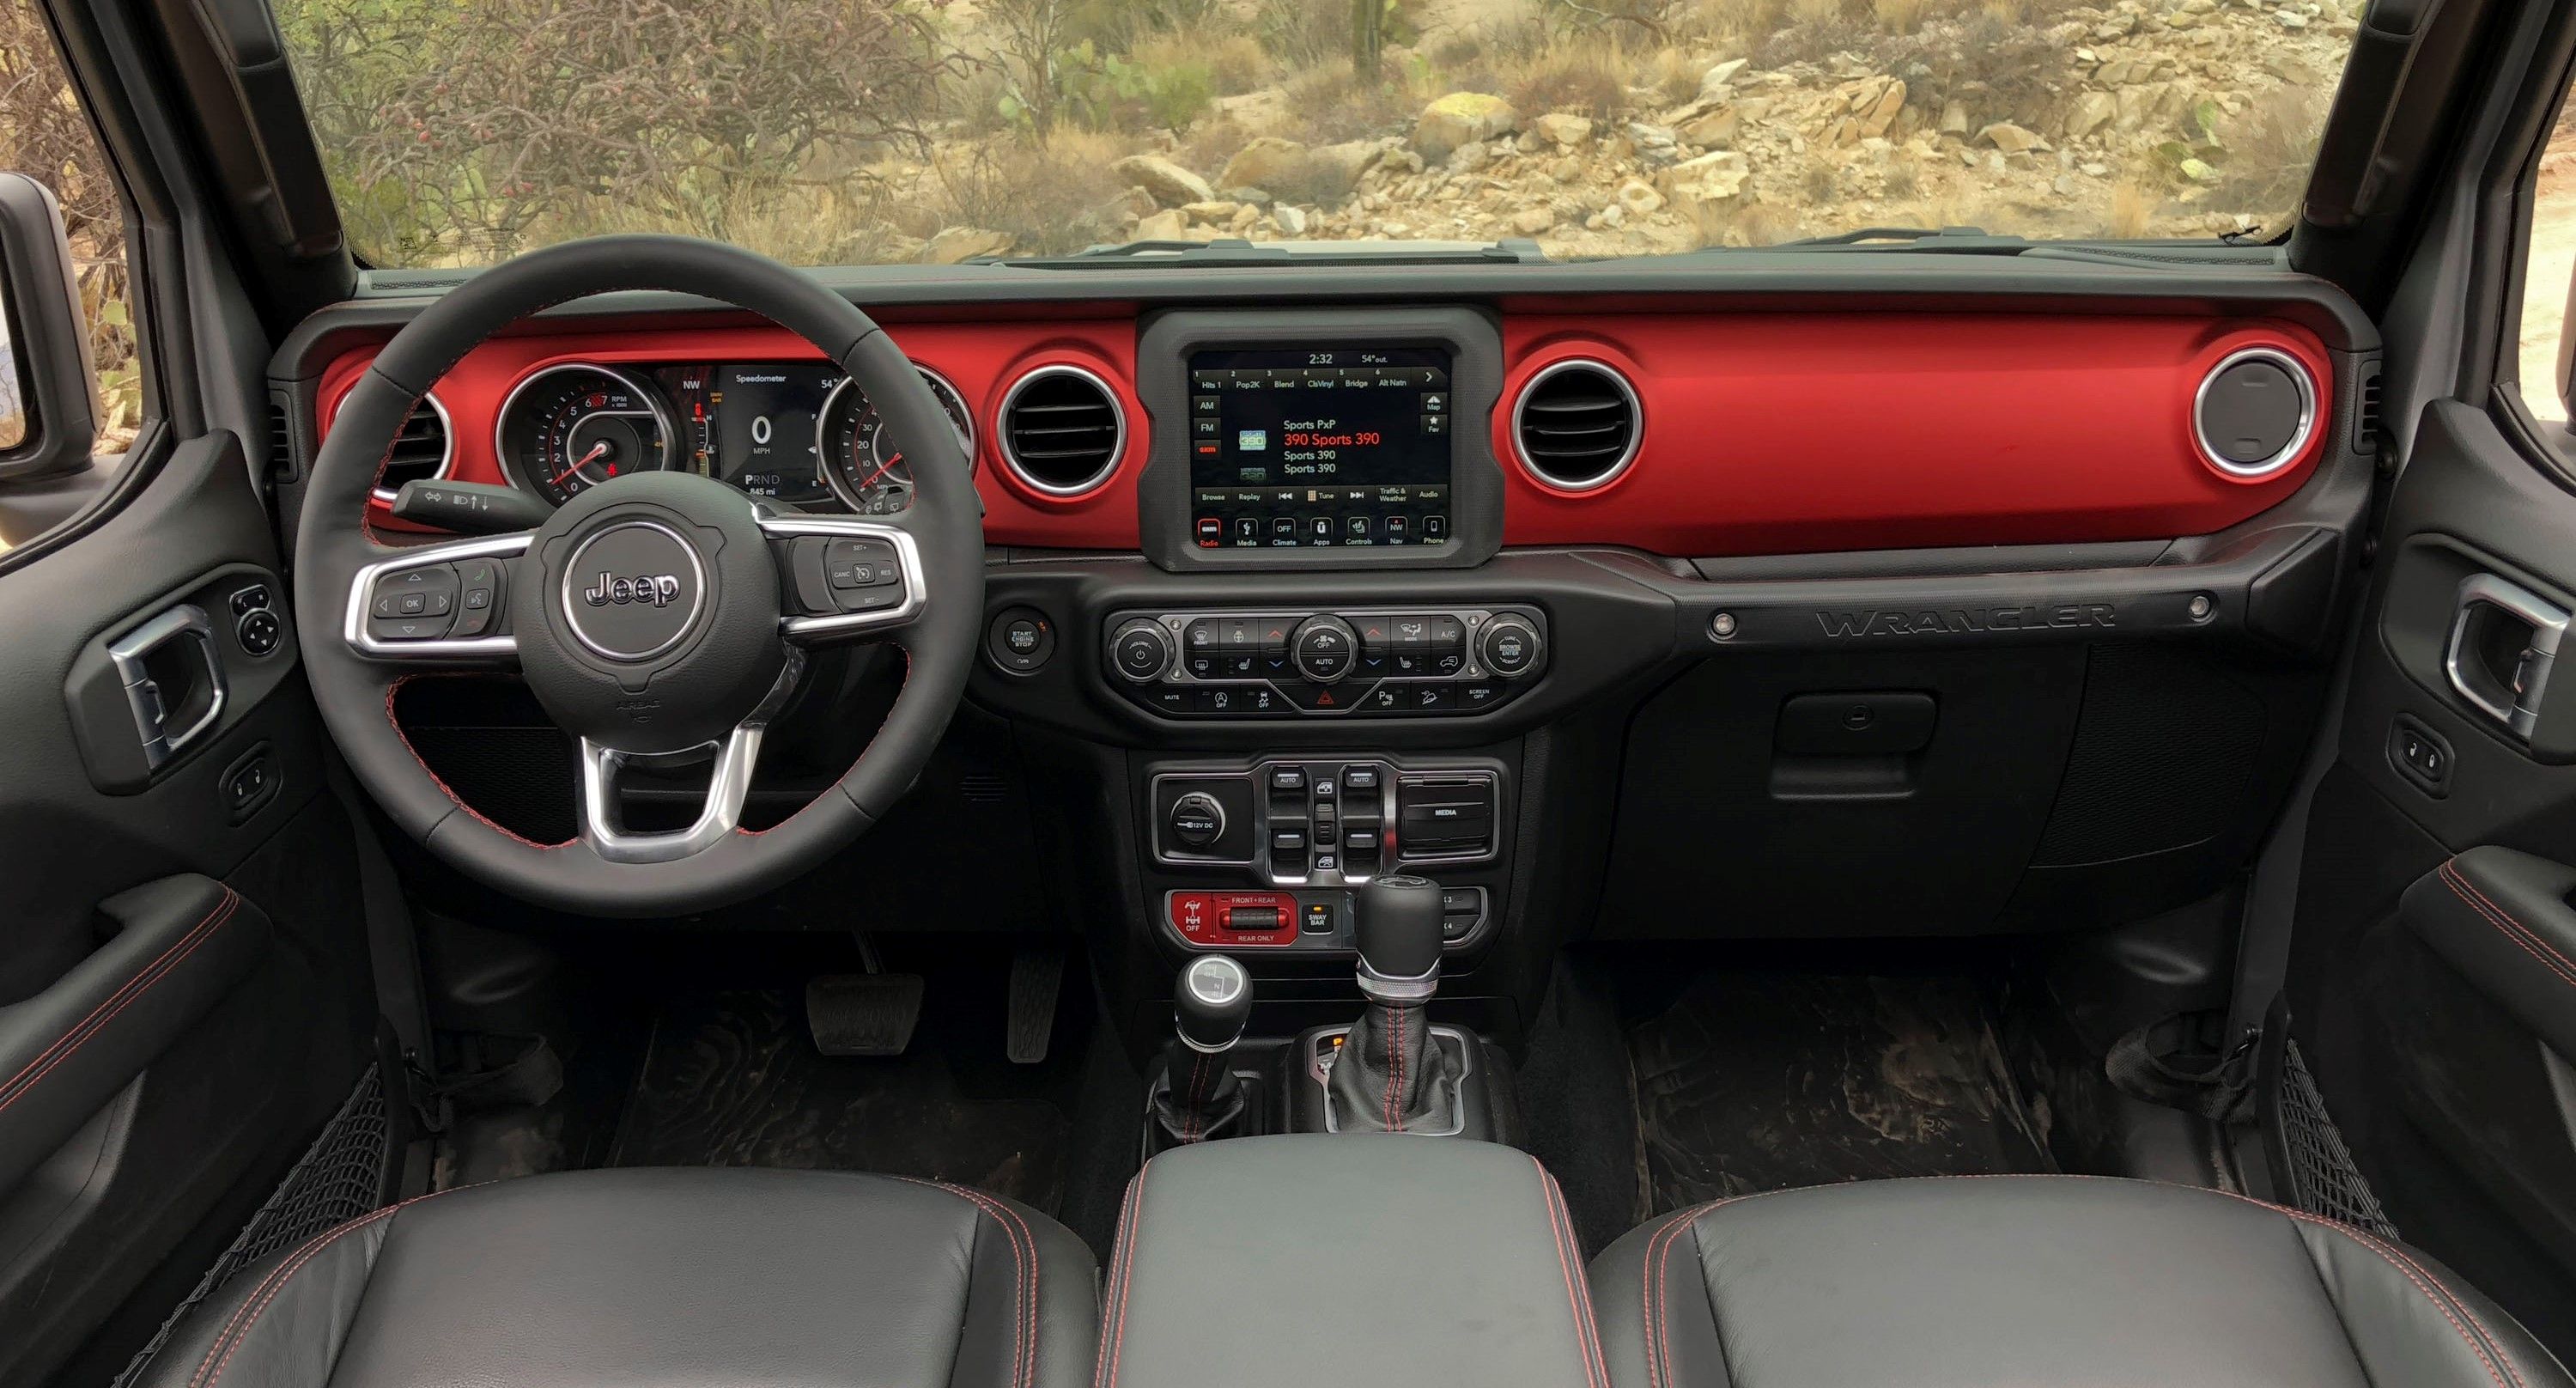 A Detailed Look At the 2018 Jeep Wrangler's Dashboard